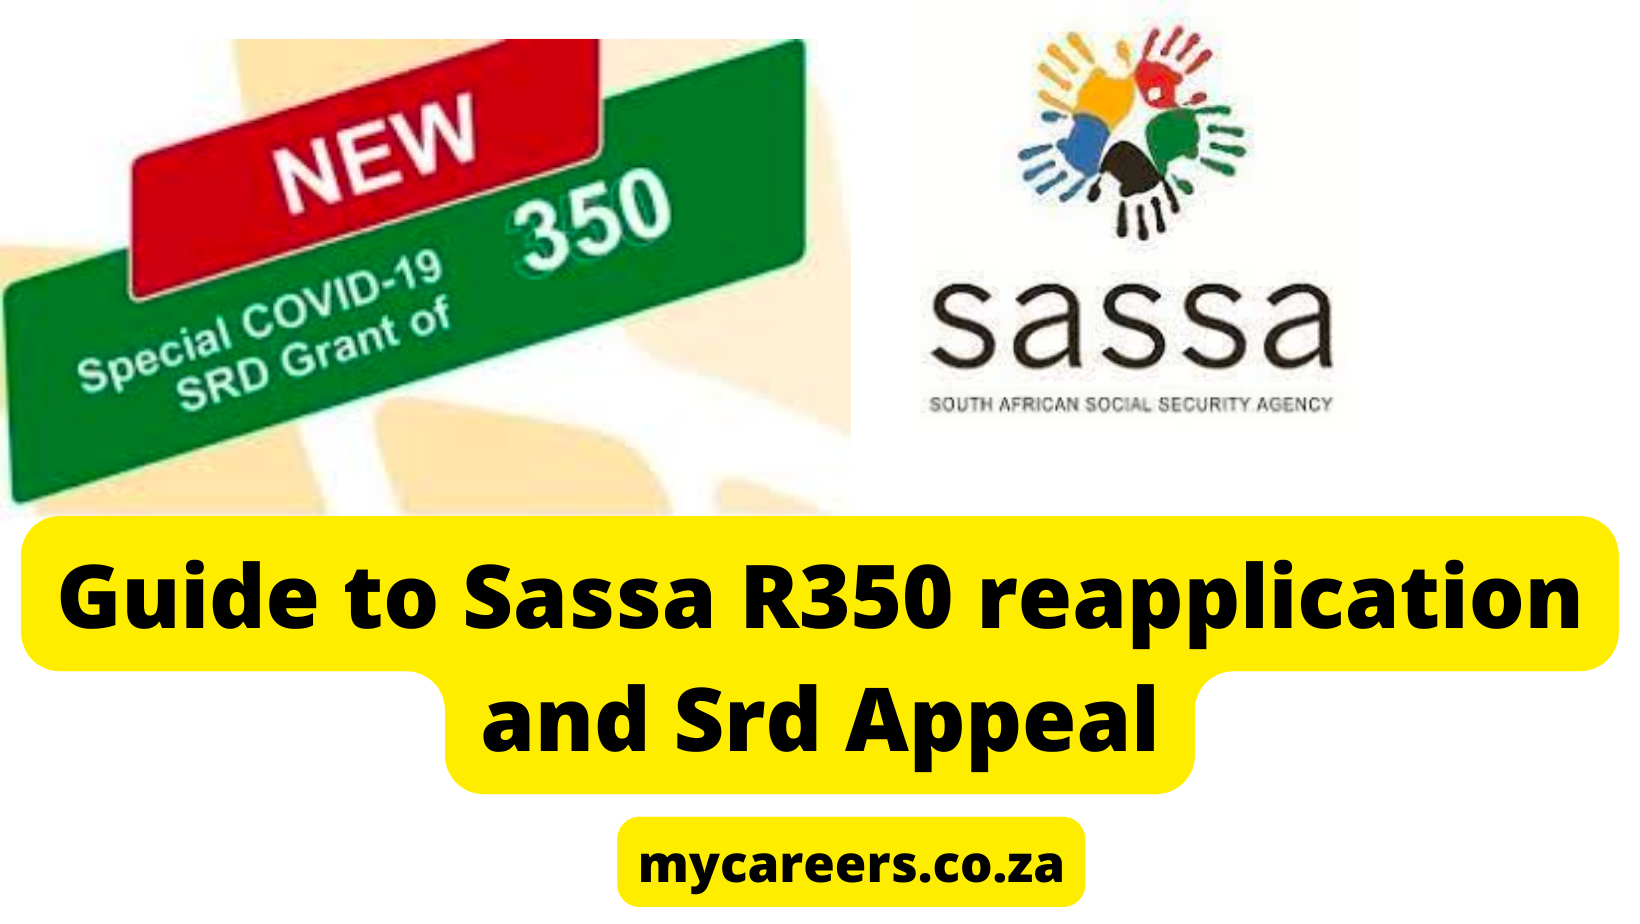 Guide to Sassa R350 reapplication and Srd Appeal